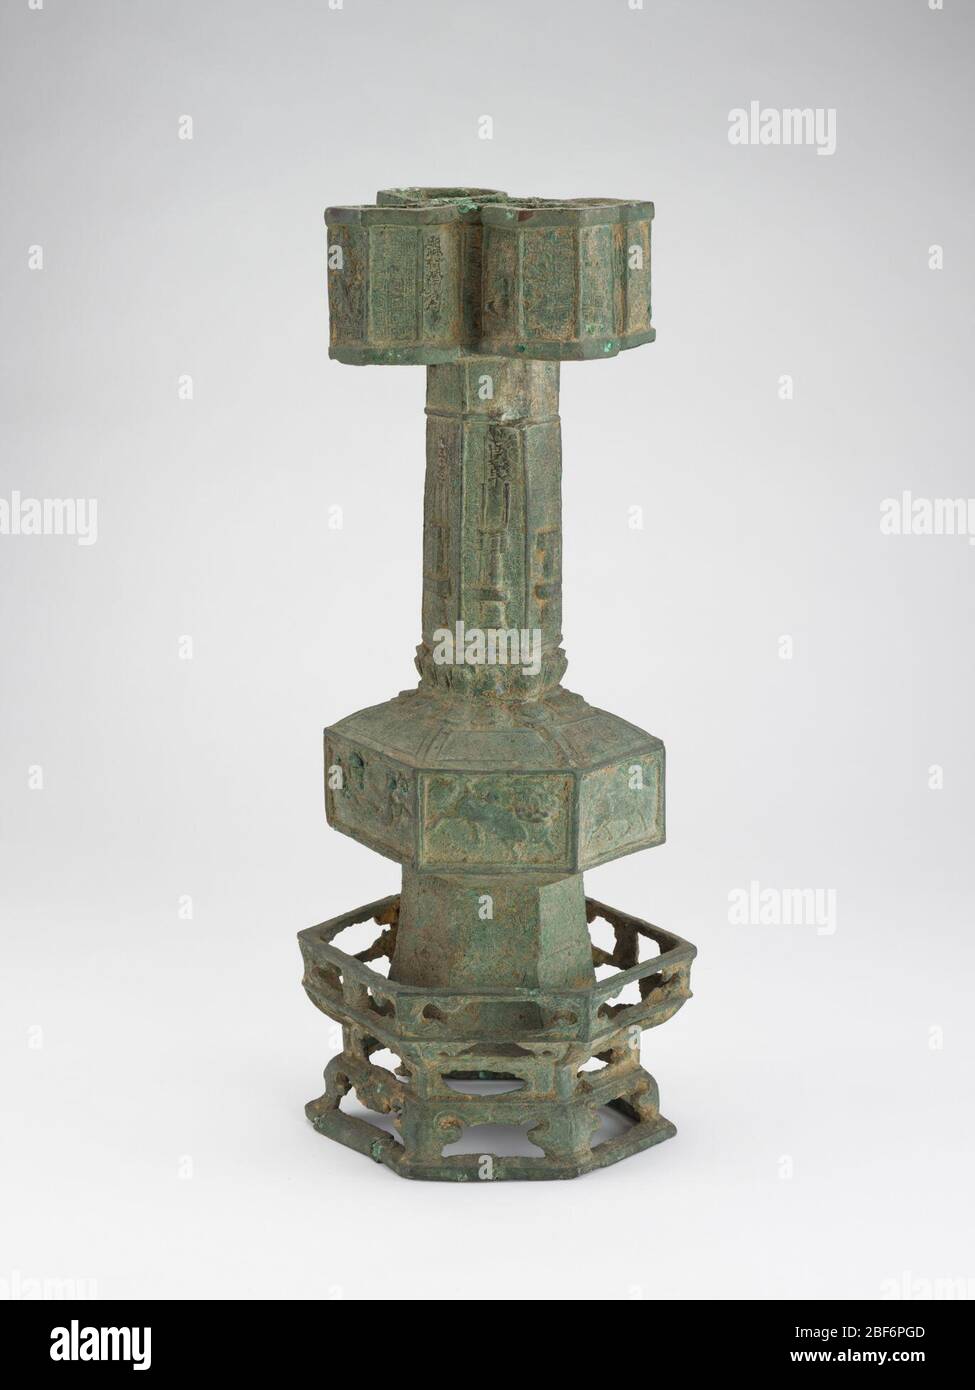 ; China; 1368-1644; Bronze; H x W: 55.4 x 24.1 cm (21 13/16 x 9 1/2 in); Gift of Charles Lang Freer Stock Photo